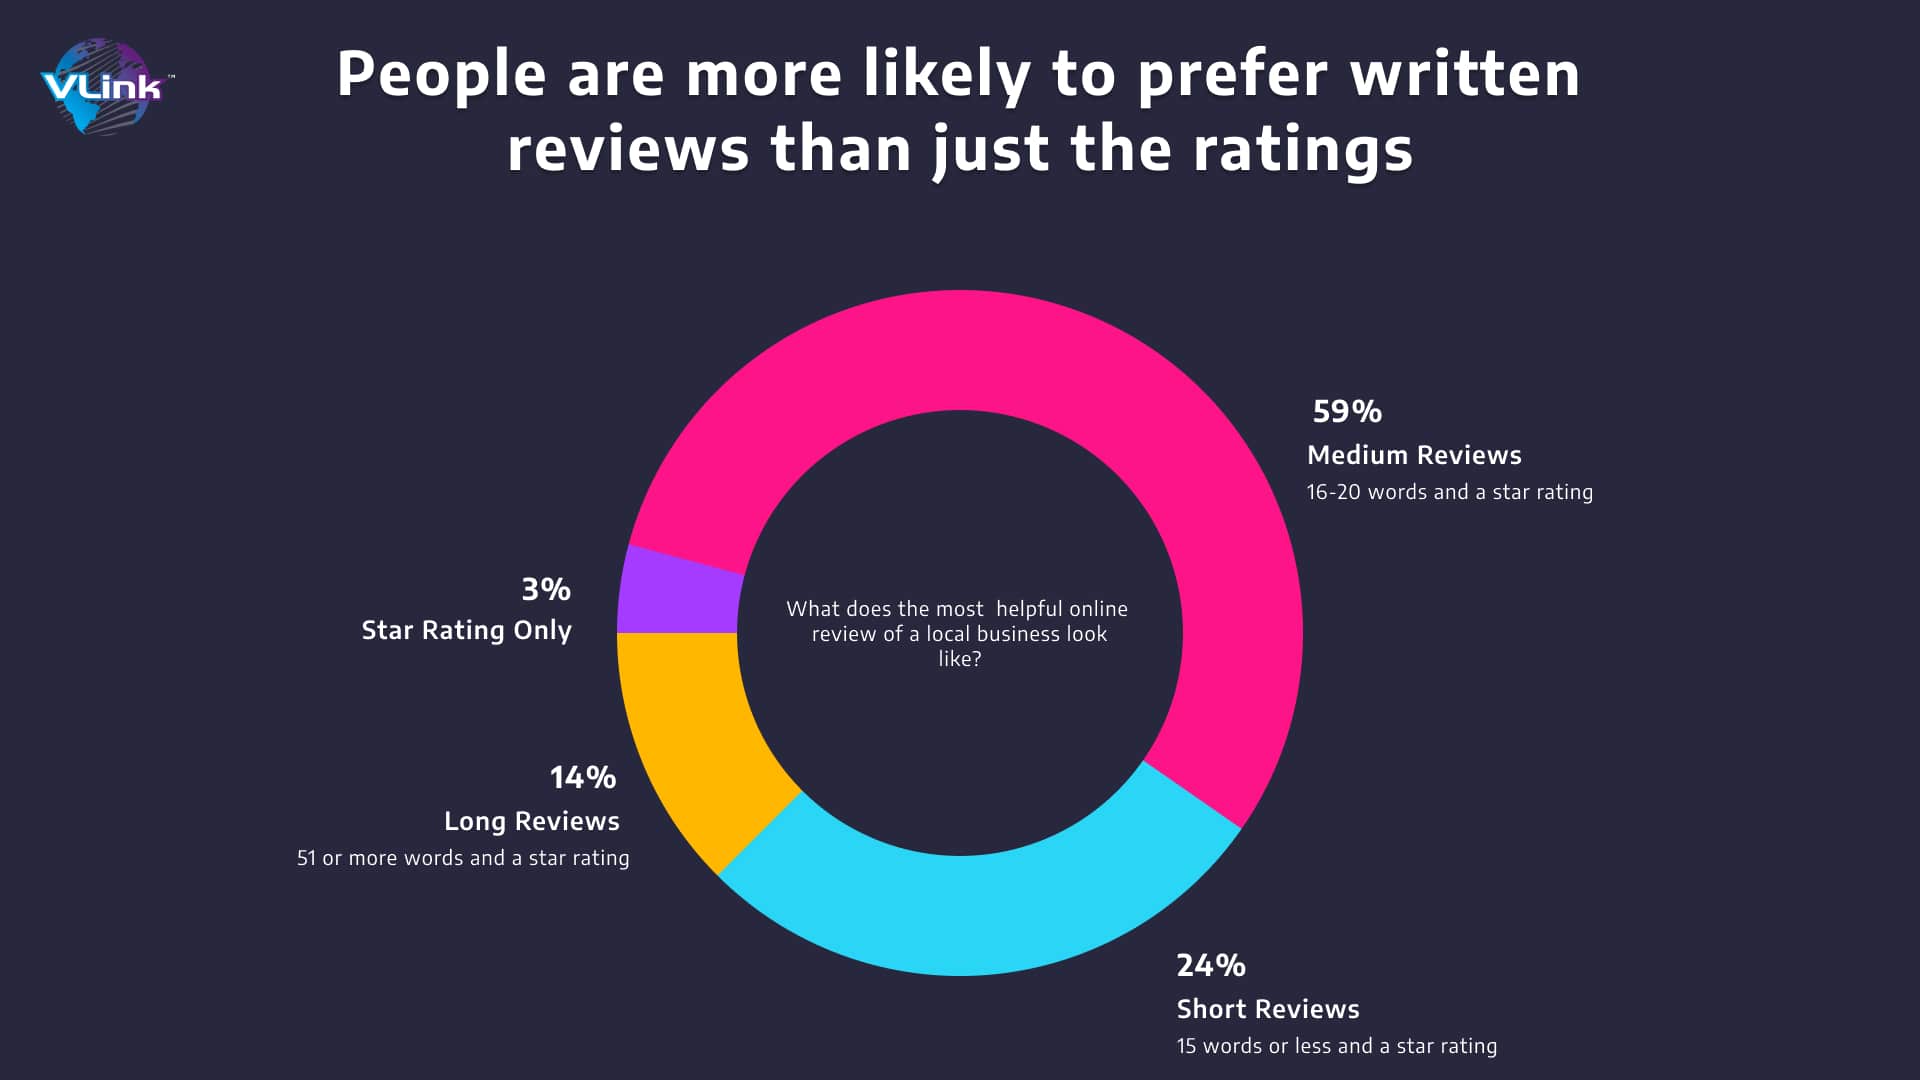 People are more likely to prefer written reviews than just the ratings. 